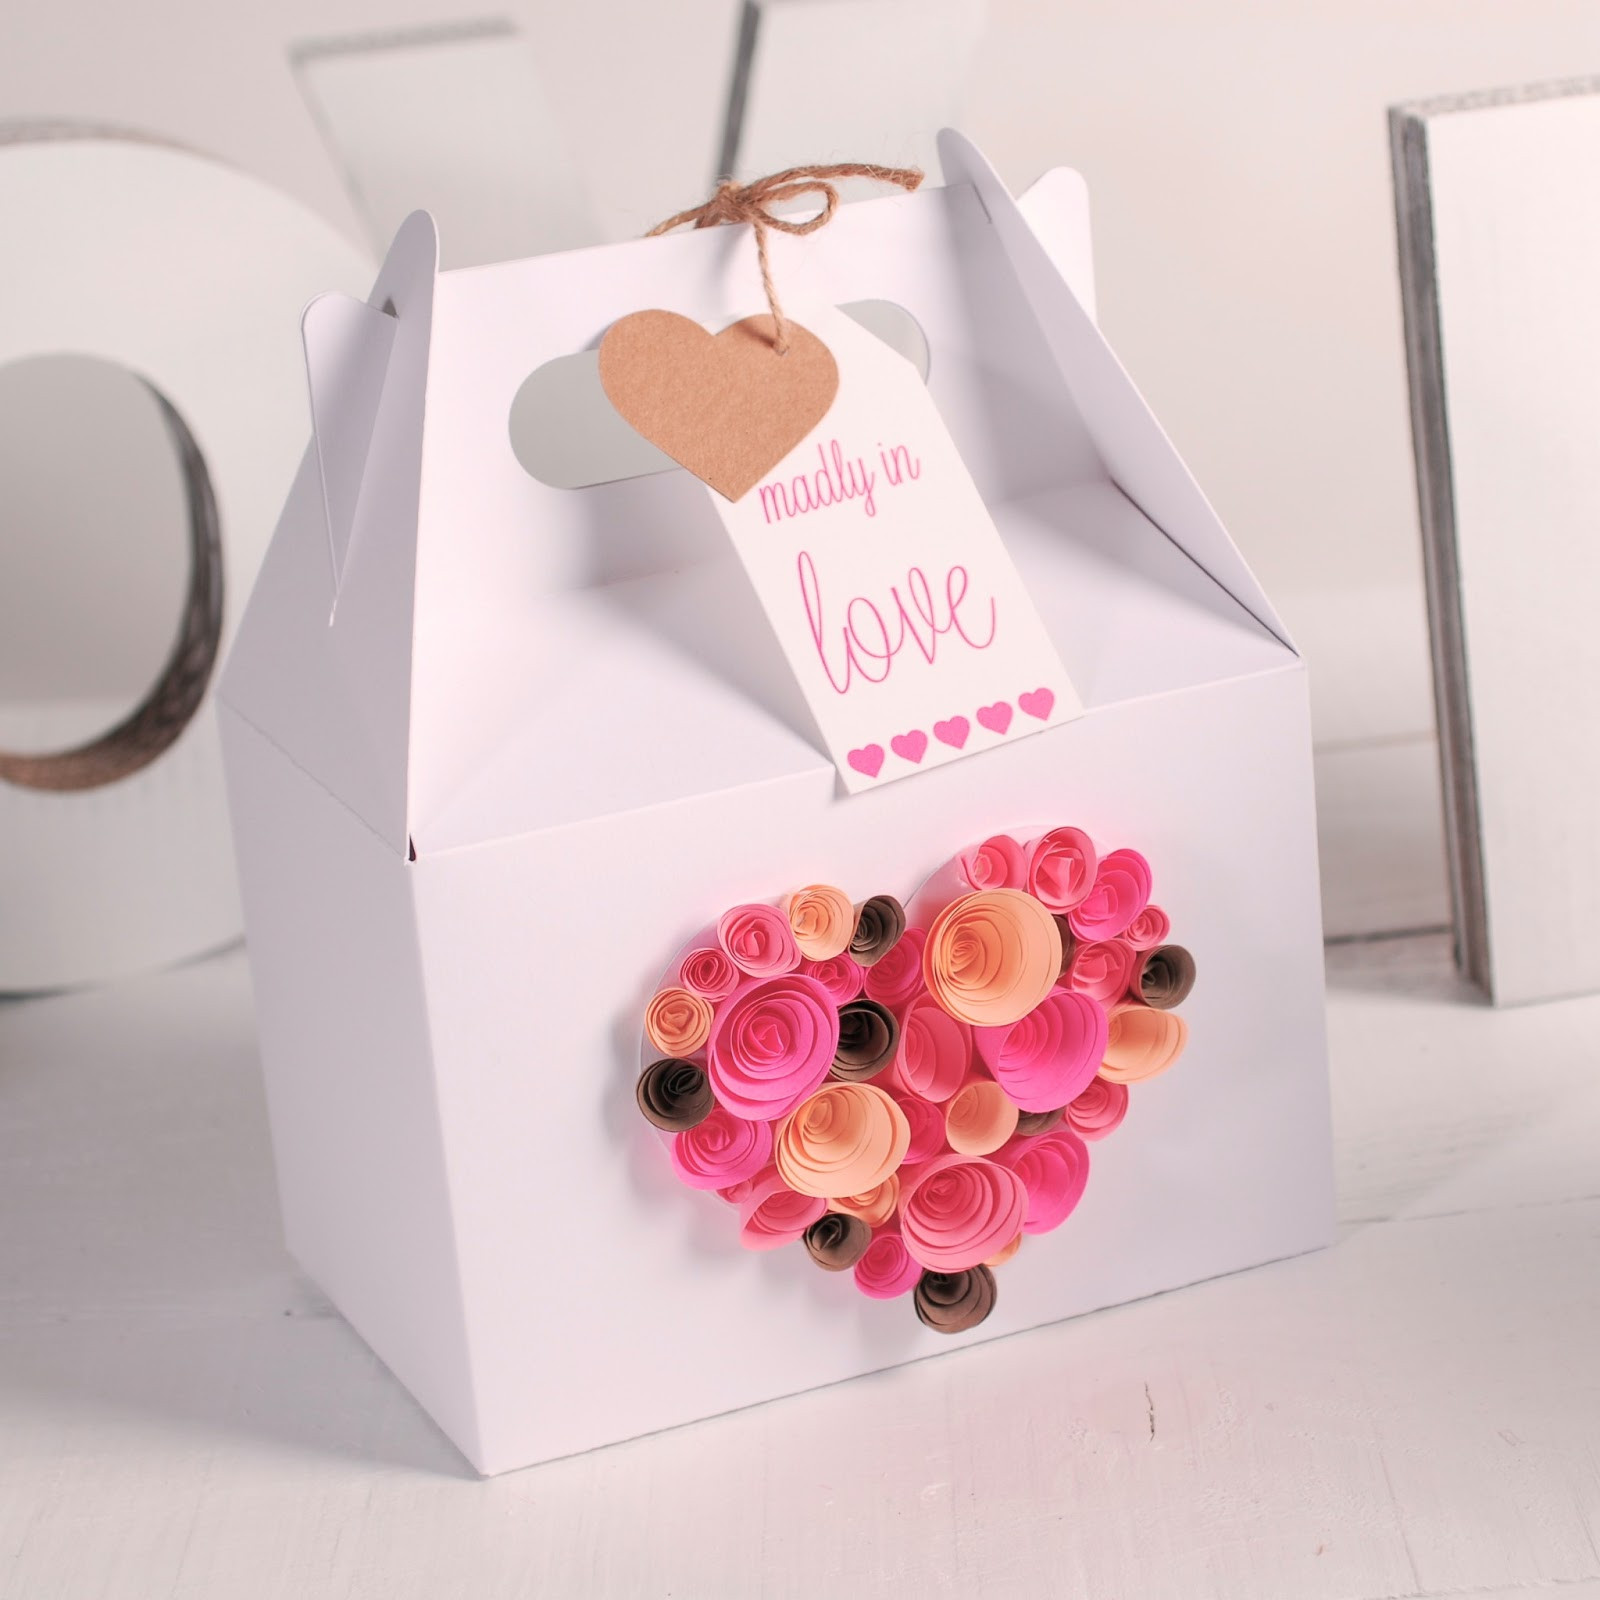 Valentines Gift Box Ideas
 Gift wrapping ideas for Valentines Day How to decorate a